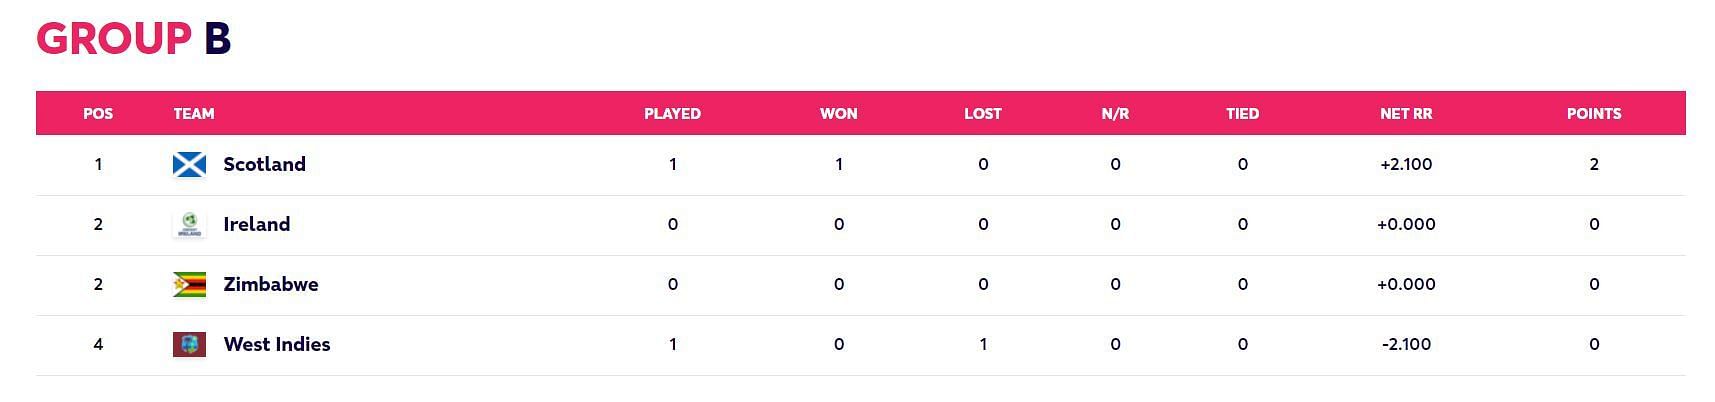 Updated Points Table after Match 3 (Image Courtesy: www.t20worldcup.com)